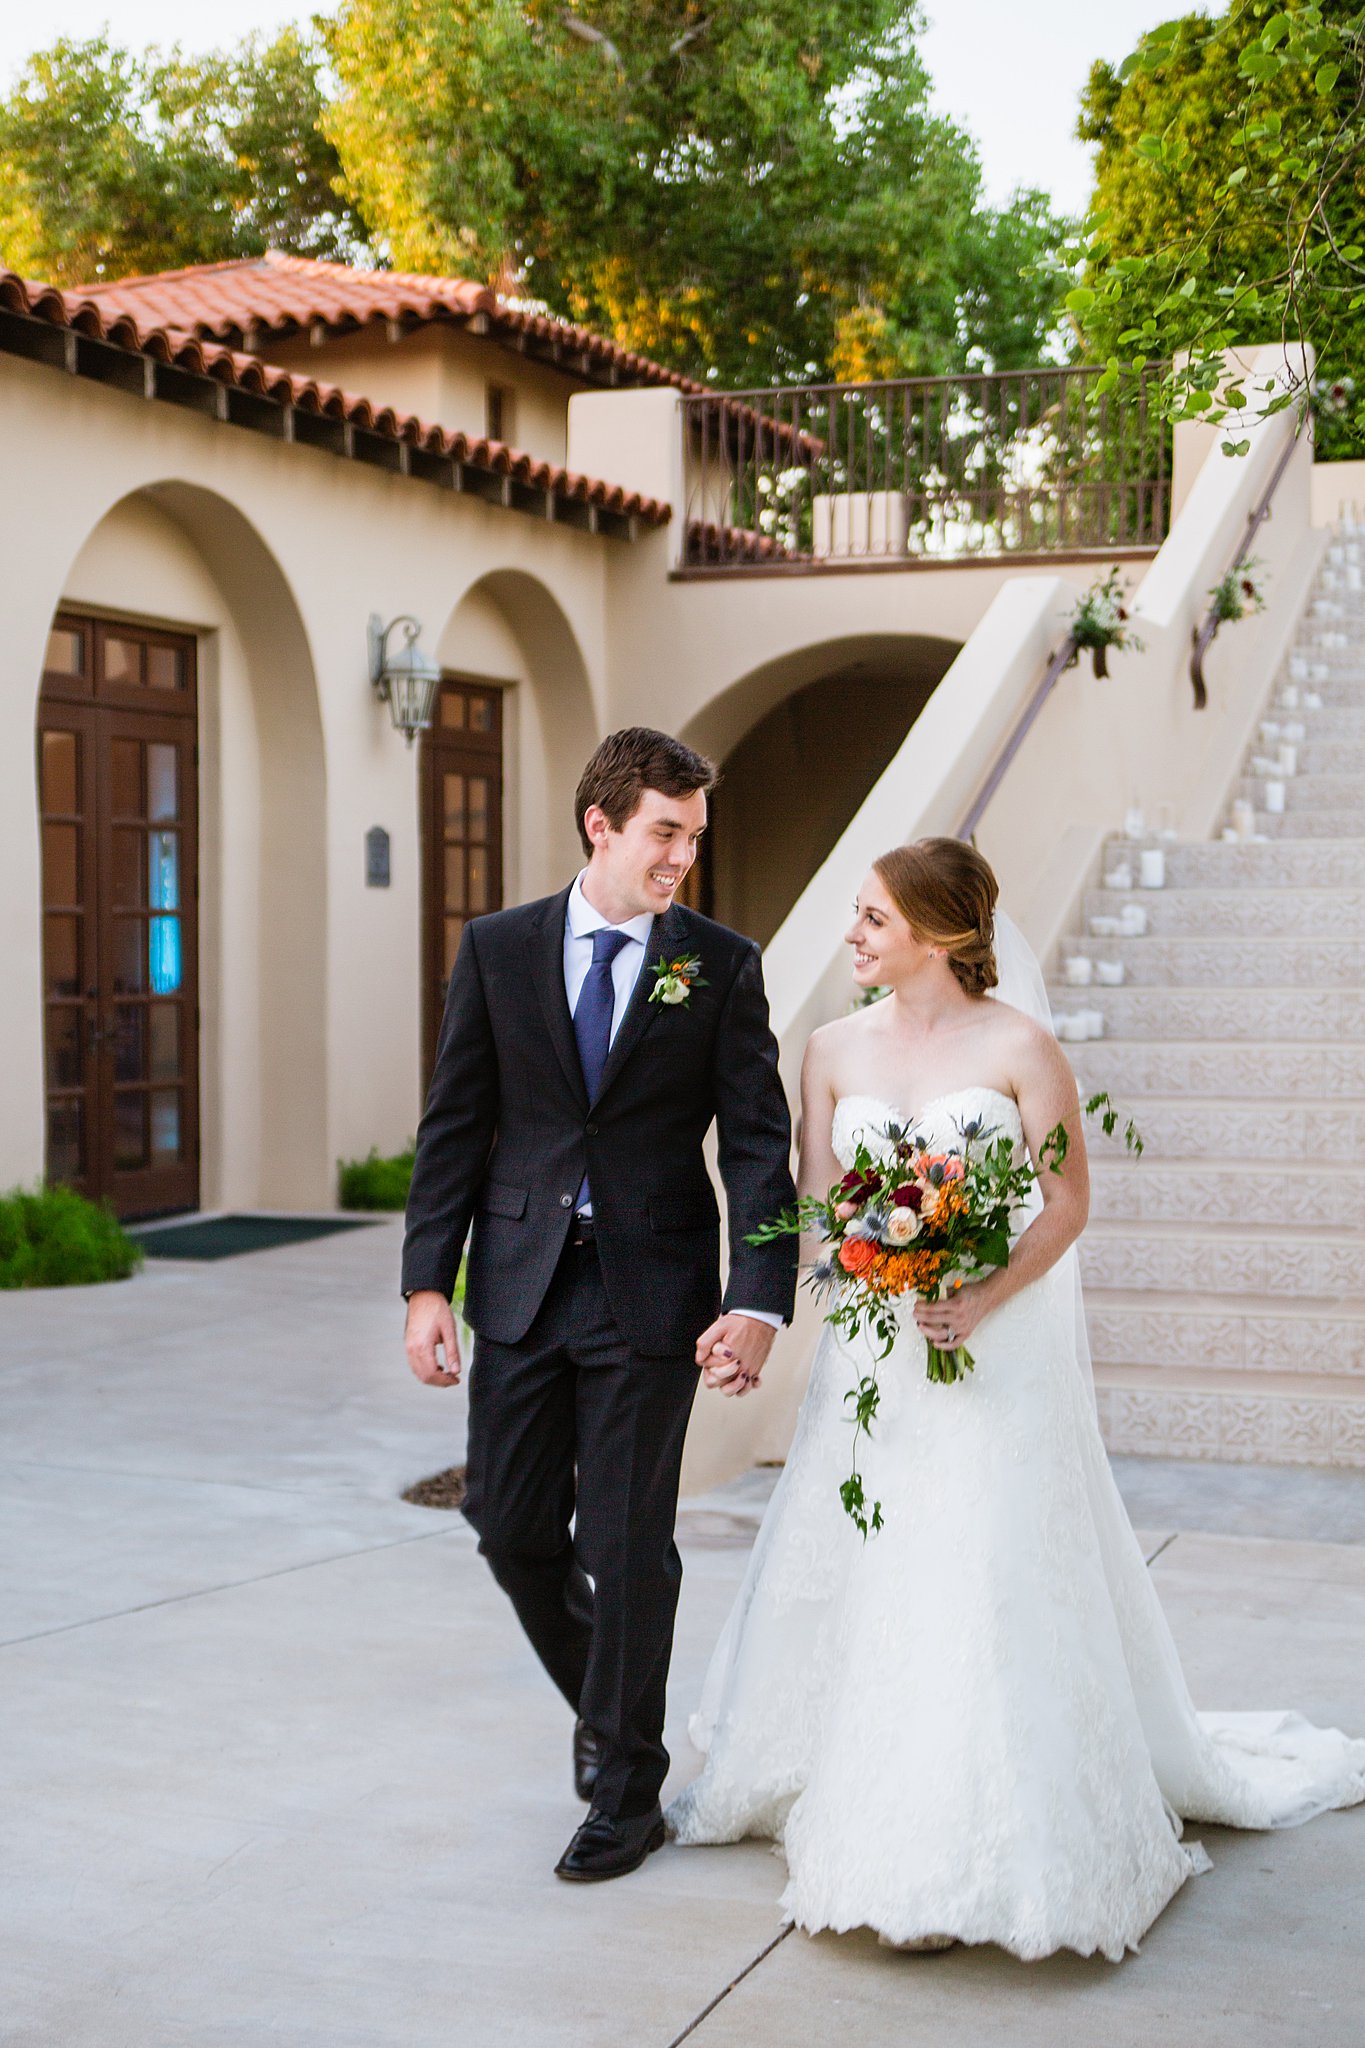 Bride and Groom walking together during their Secret Garden Events wedding by Phoenix wedding photographer PMA Photography.